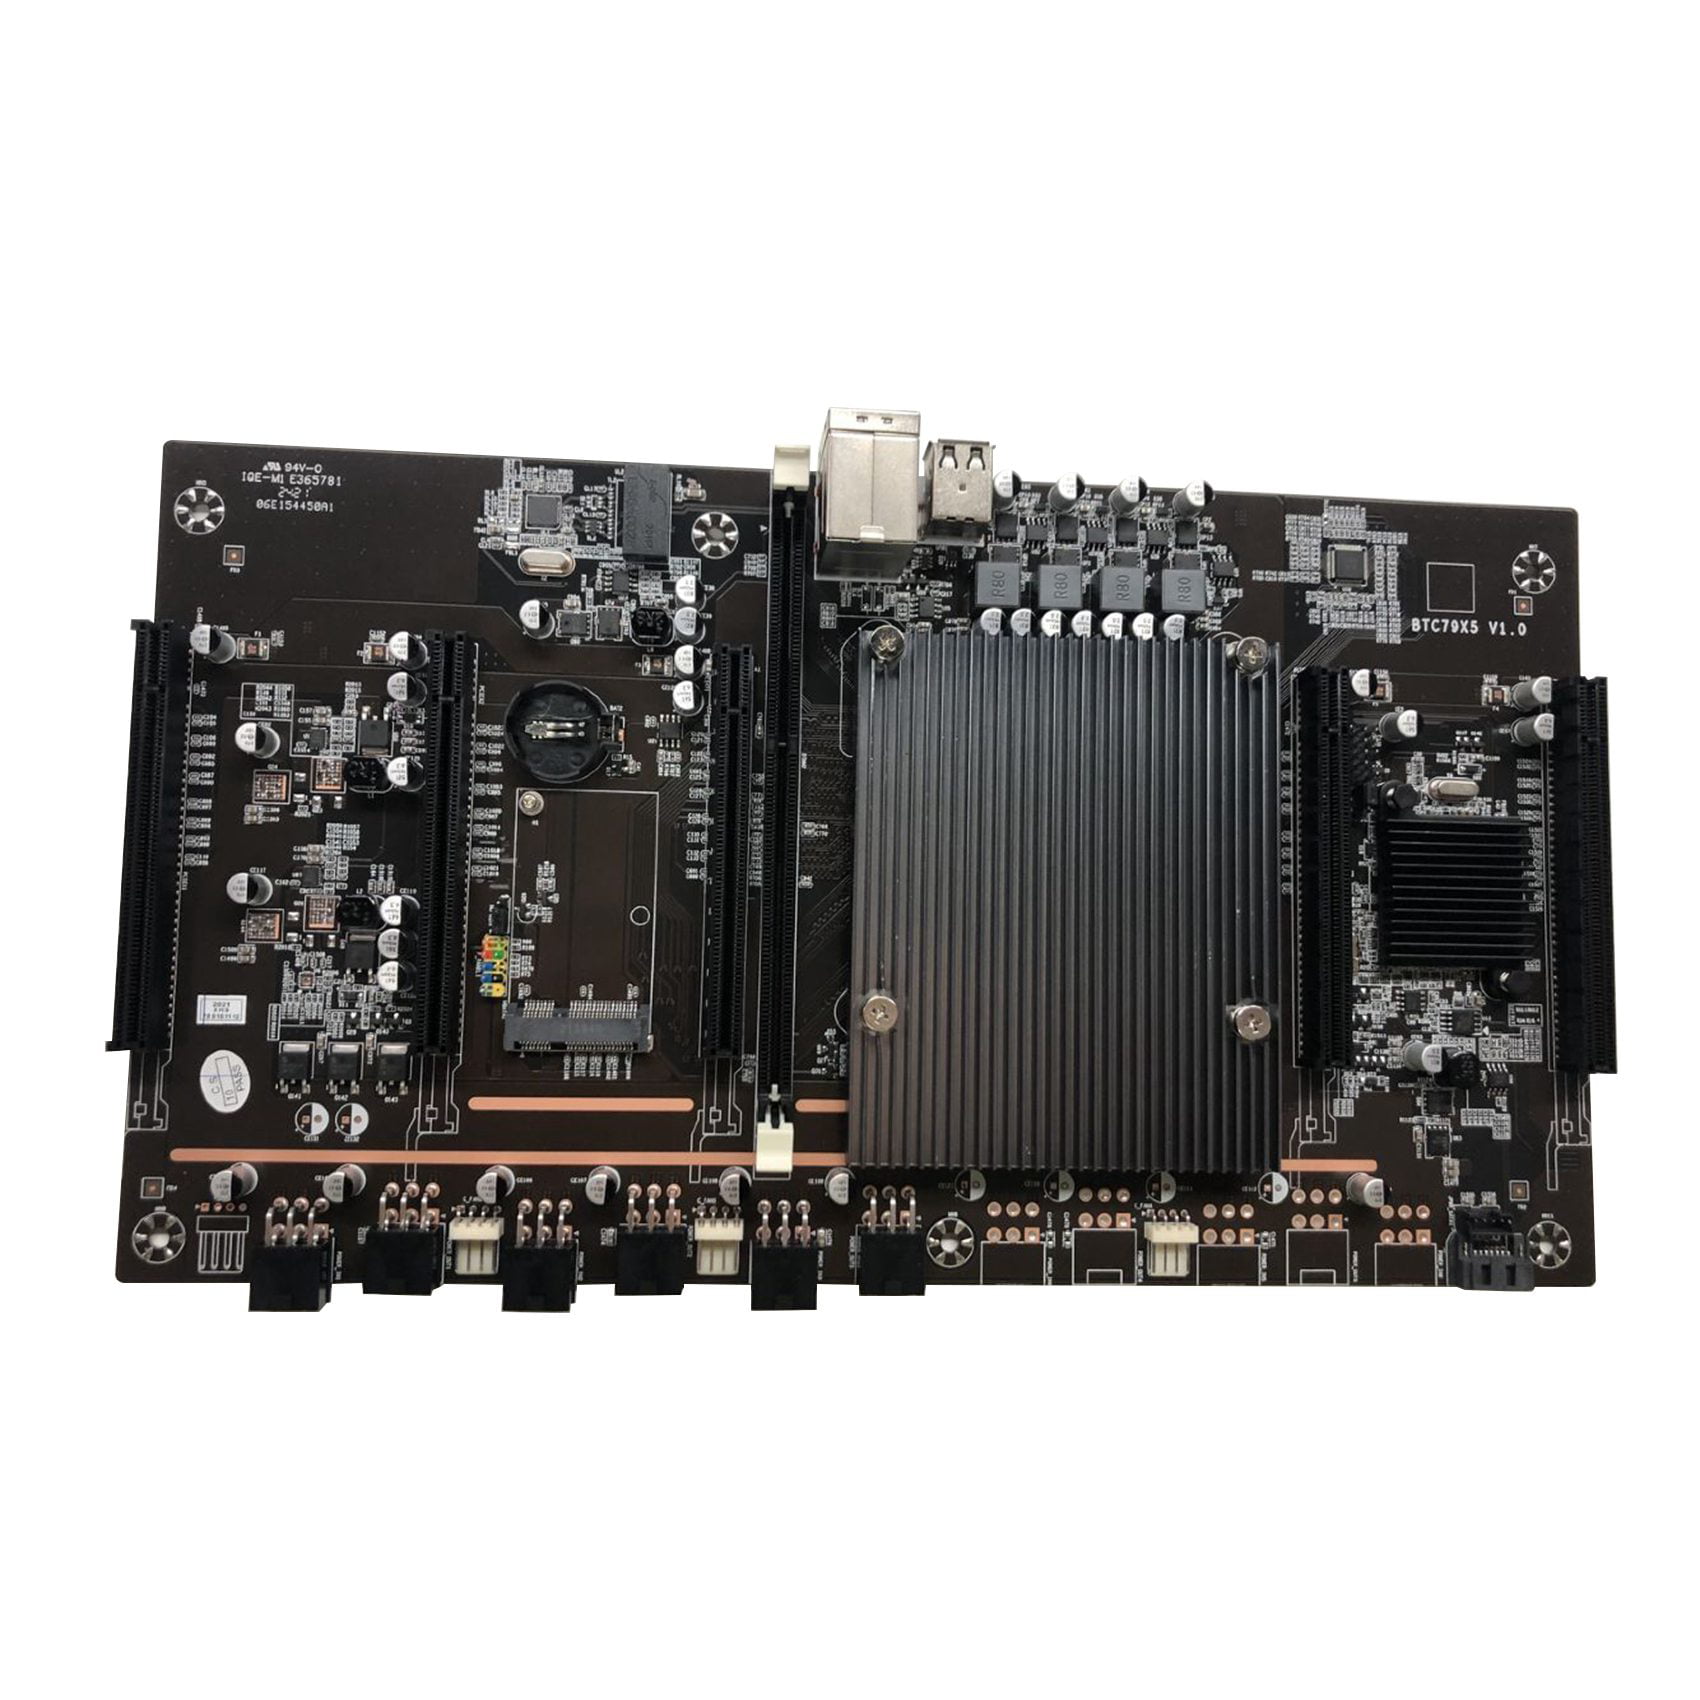 Kingjinglo BTC X79-H61 Miner Motherboard CPU Supports 3060 Graphics Card with 5 Graphics Card Slot LGA 2011 DDR3 32G SATA3 .0 BTC Mining Motherboard